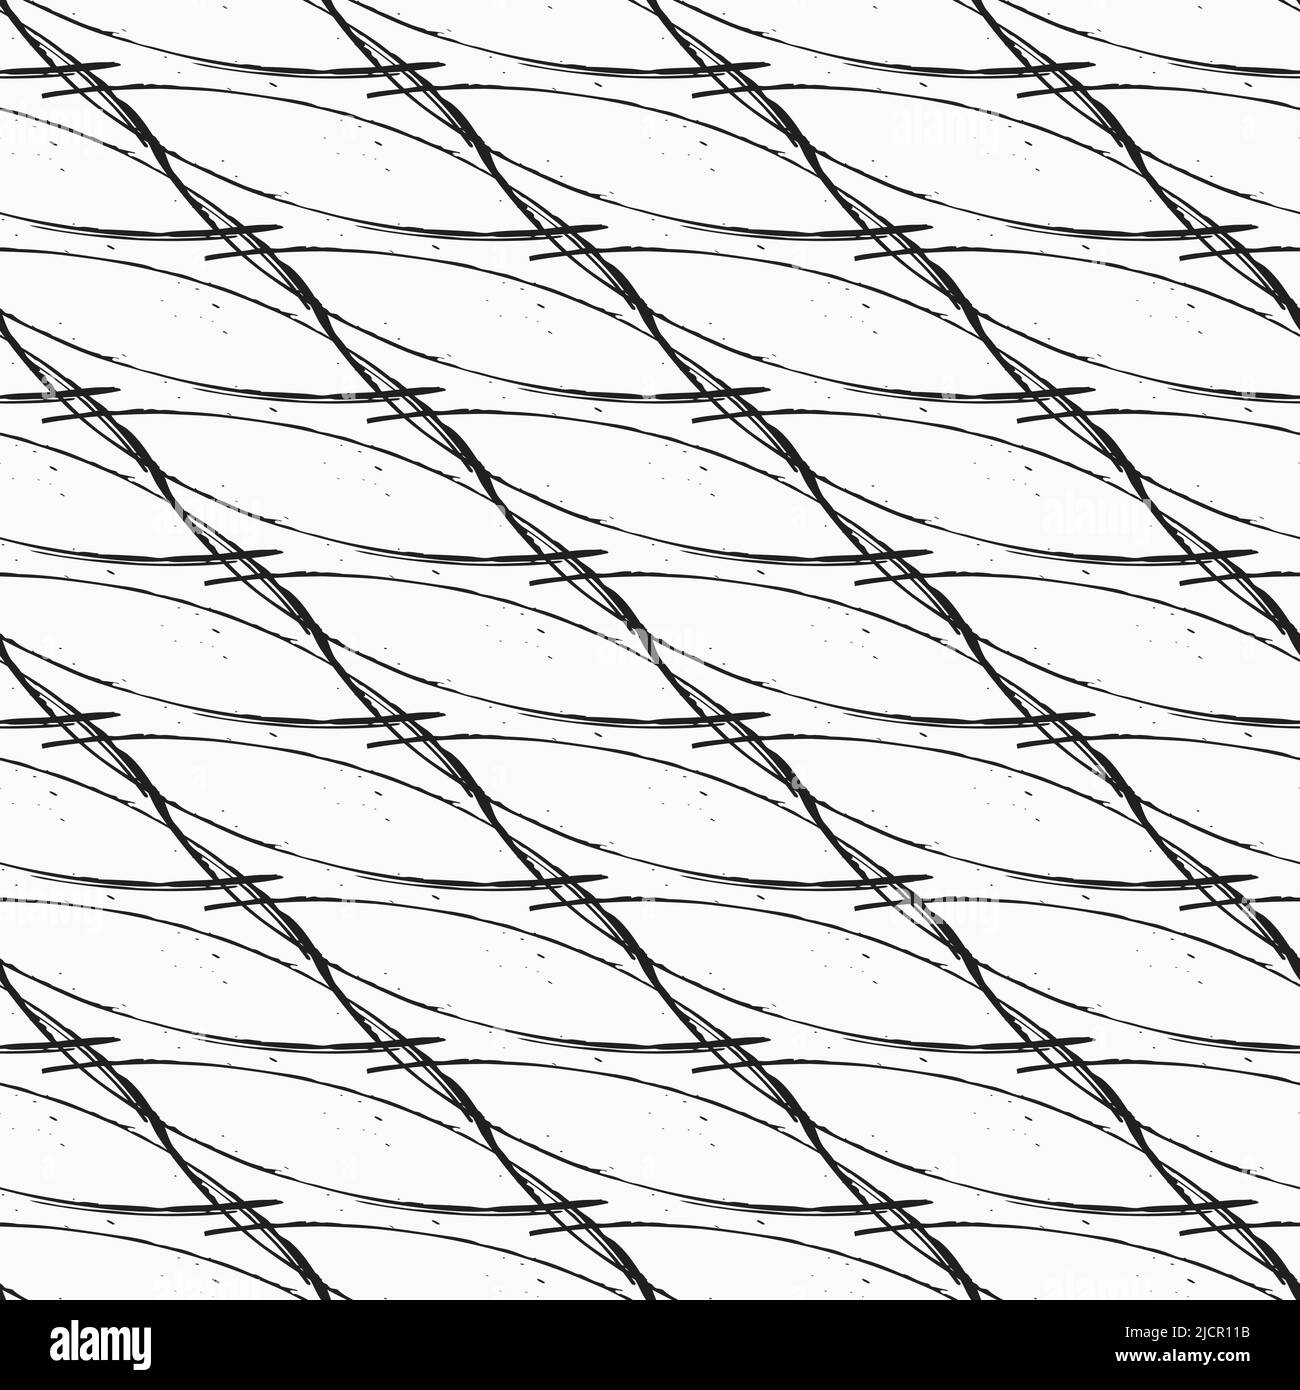 Abstract grunge lattice weave seamless vector pattern Fine calligraphy brush interlocking woven background. Monochrome inky backdrop. Overlapping Stock Vector